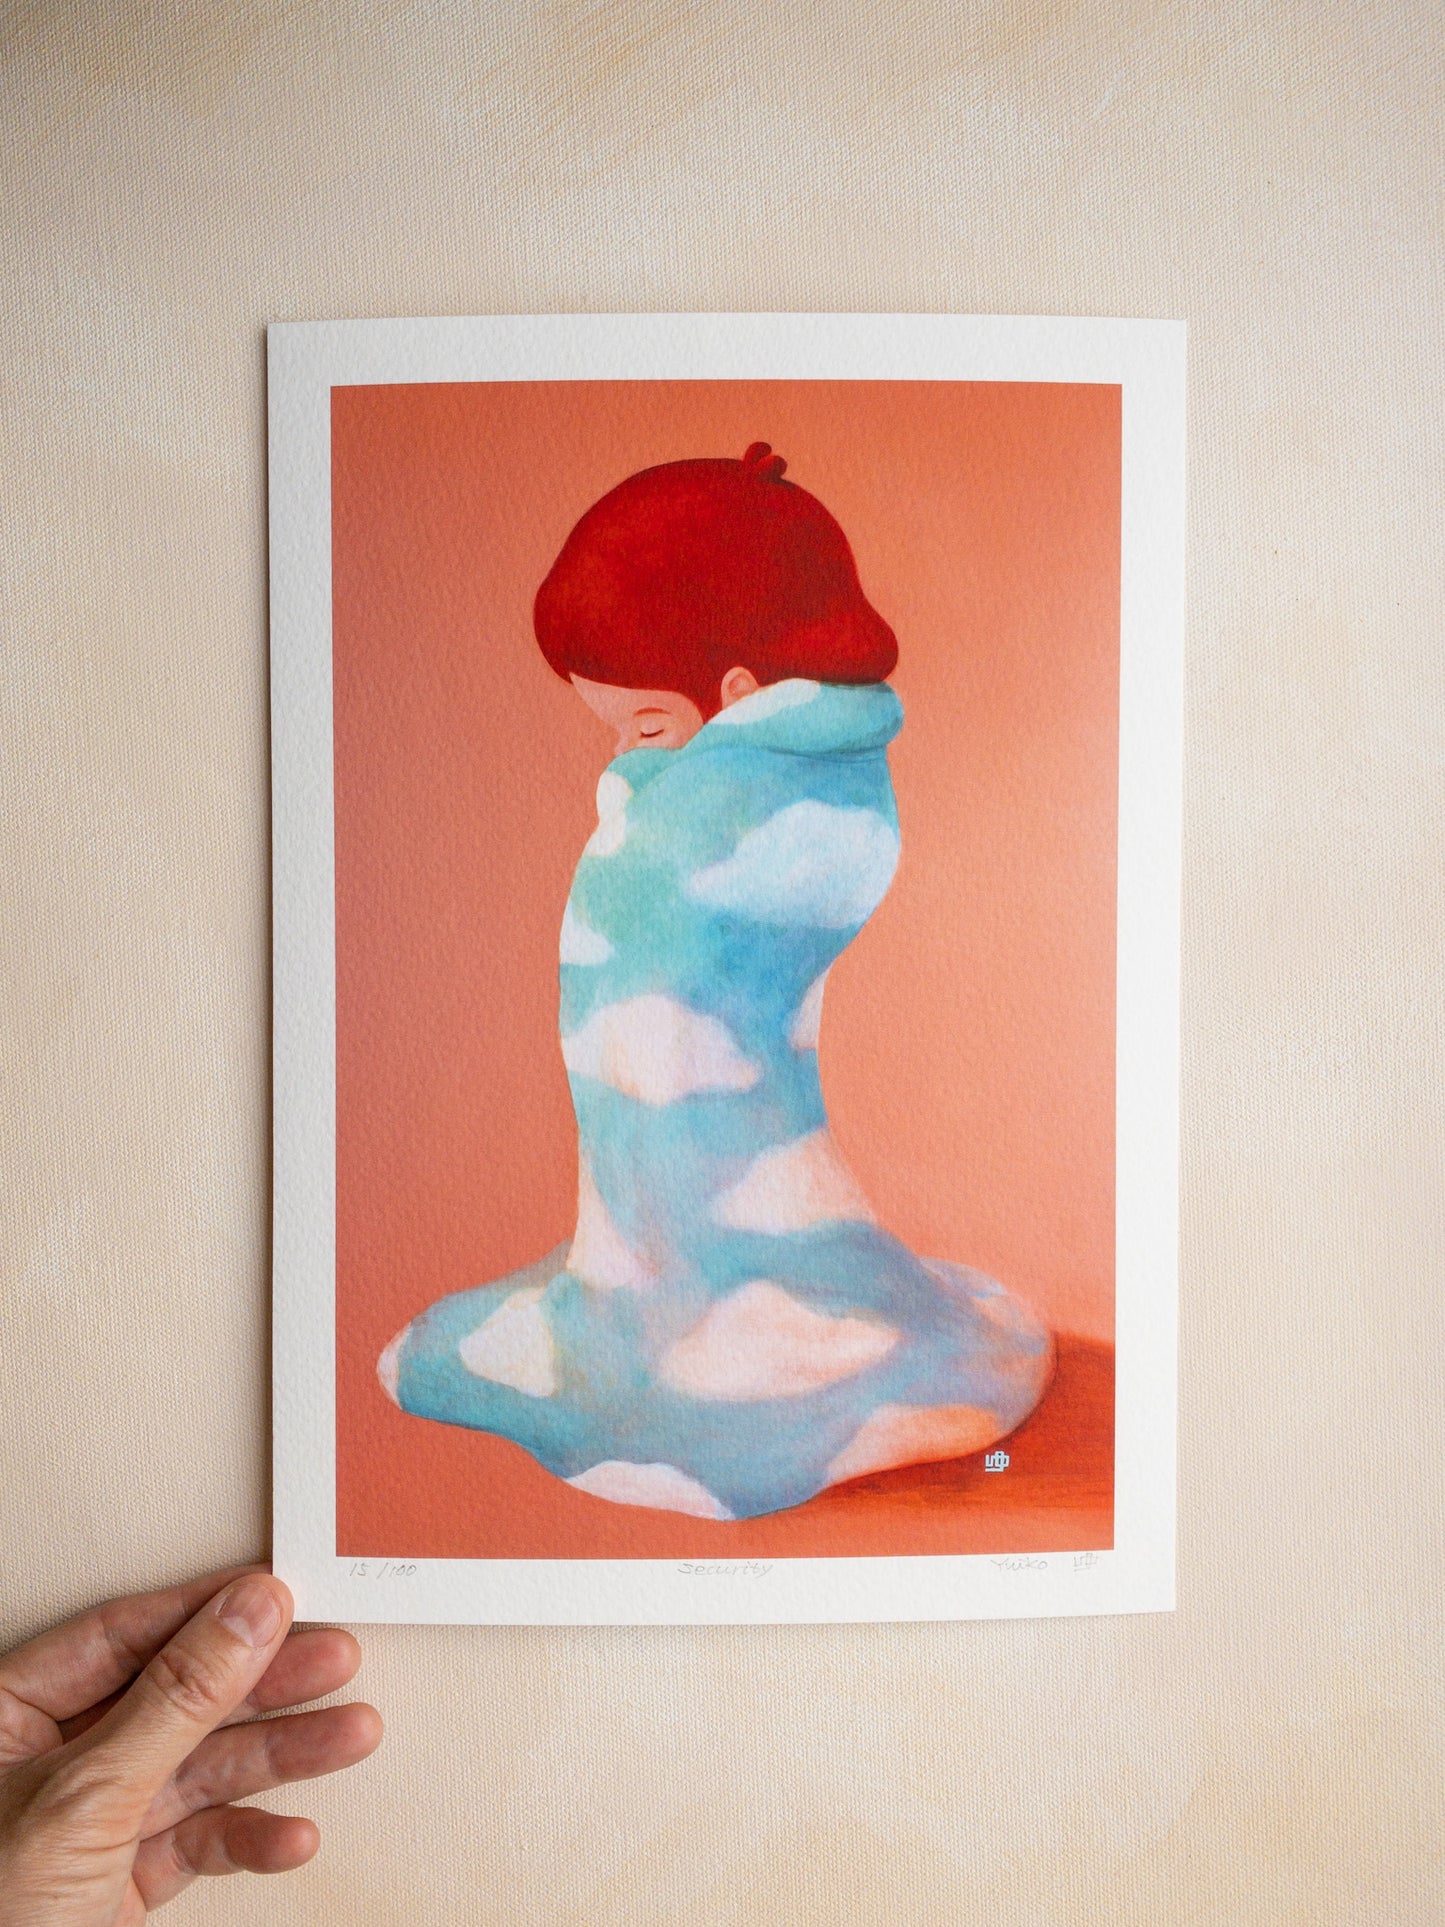 Art Print - Popoco ‘Security’ (Limited print of 100)